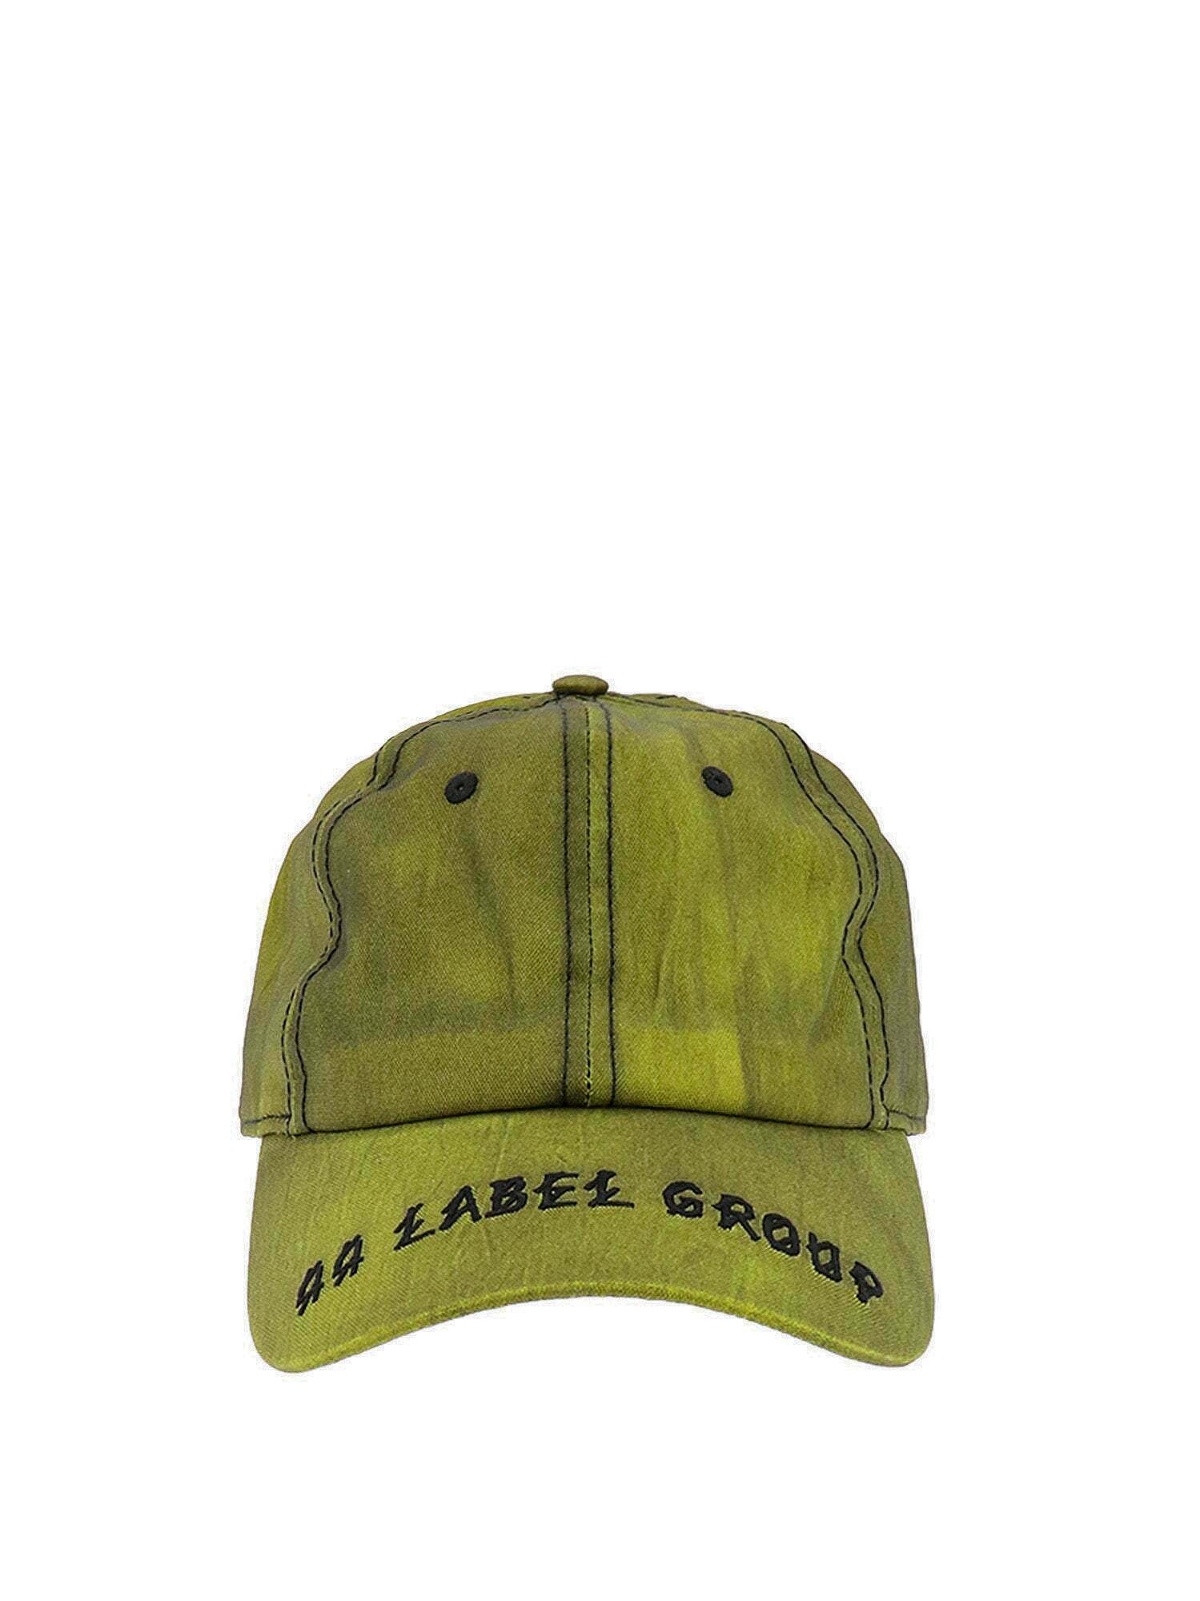 Photo: 44 Label Group Hat Green   Mens